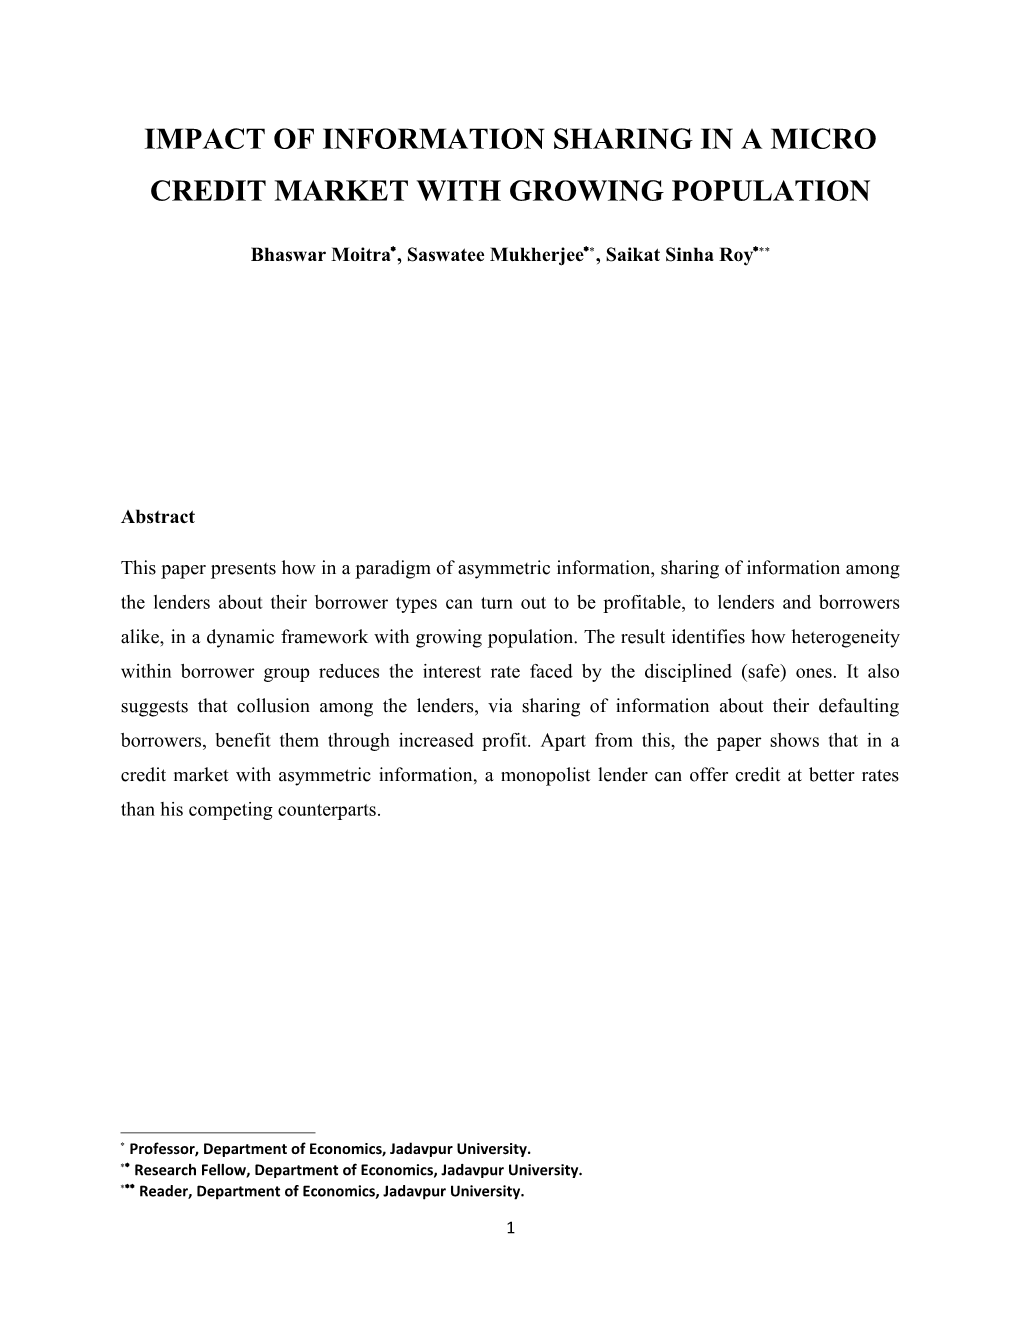 Impact of Information Sharing in a Micro Credit Market with Growing Population